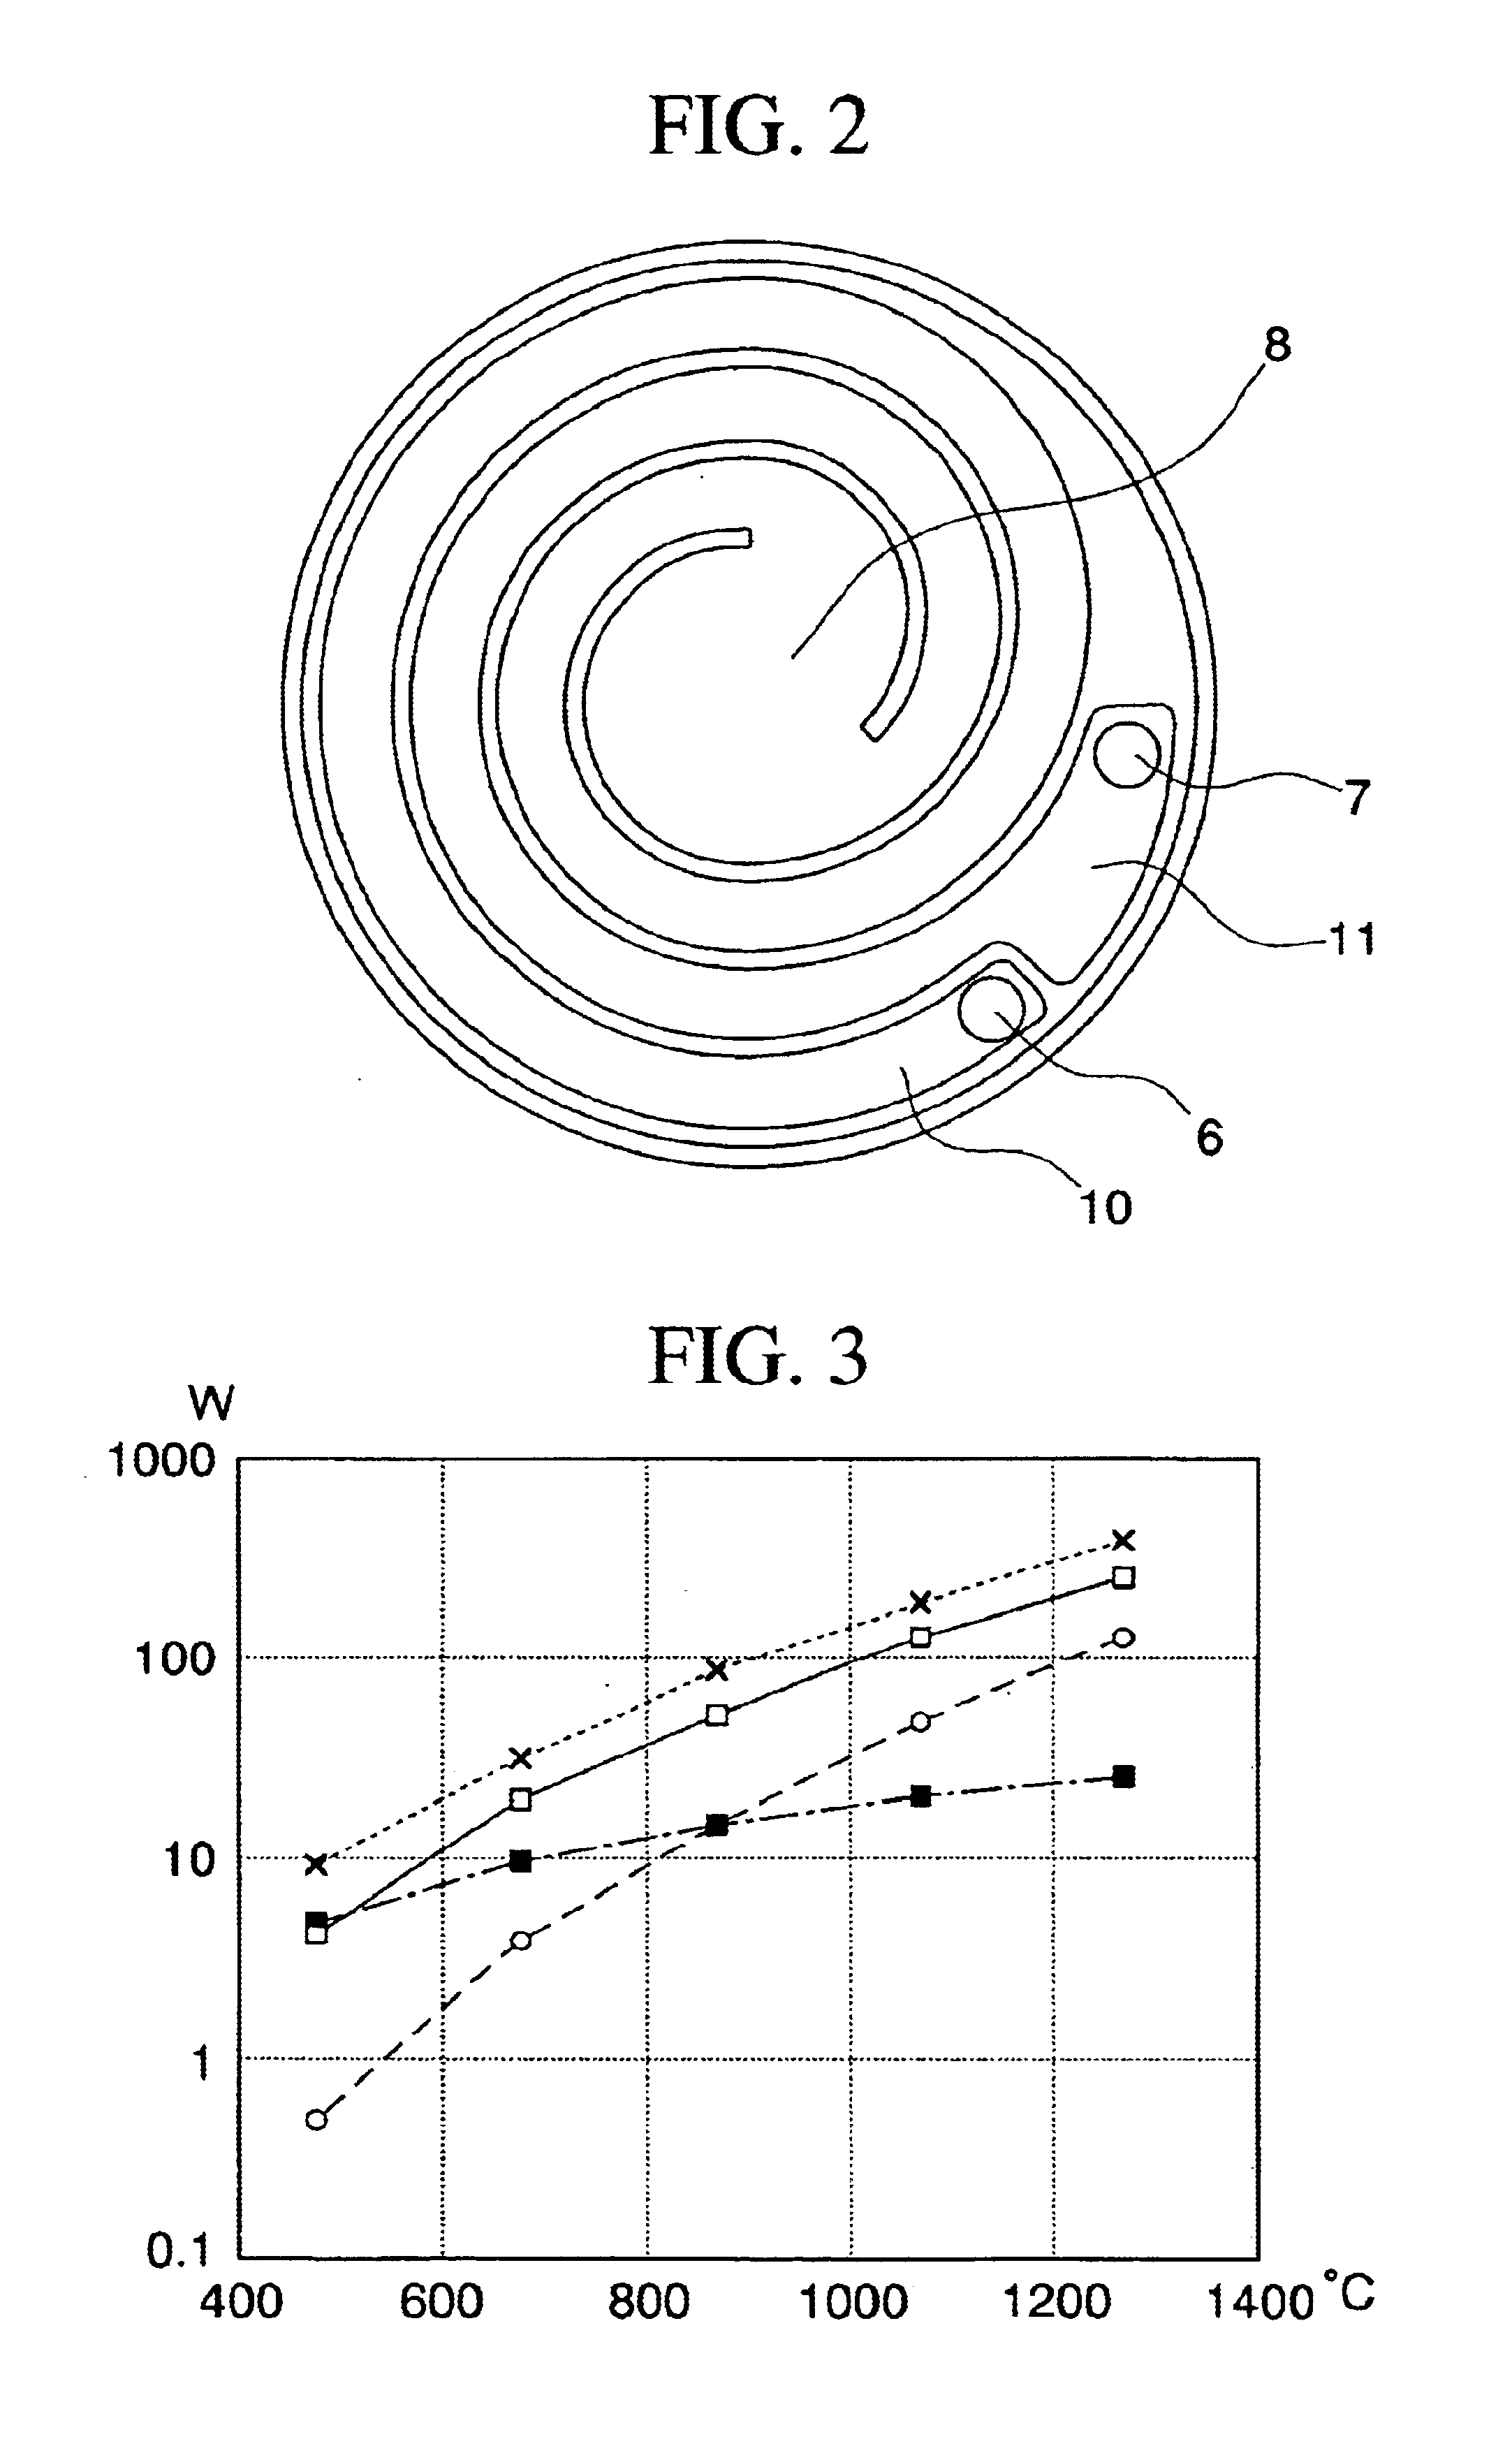 Microcombustion heater having heating surface which emits radiant heat